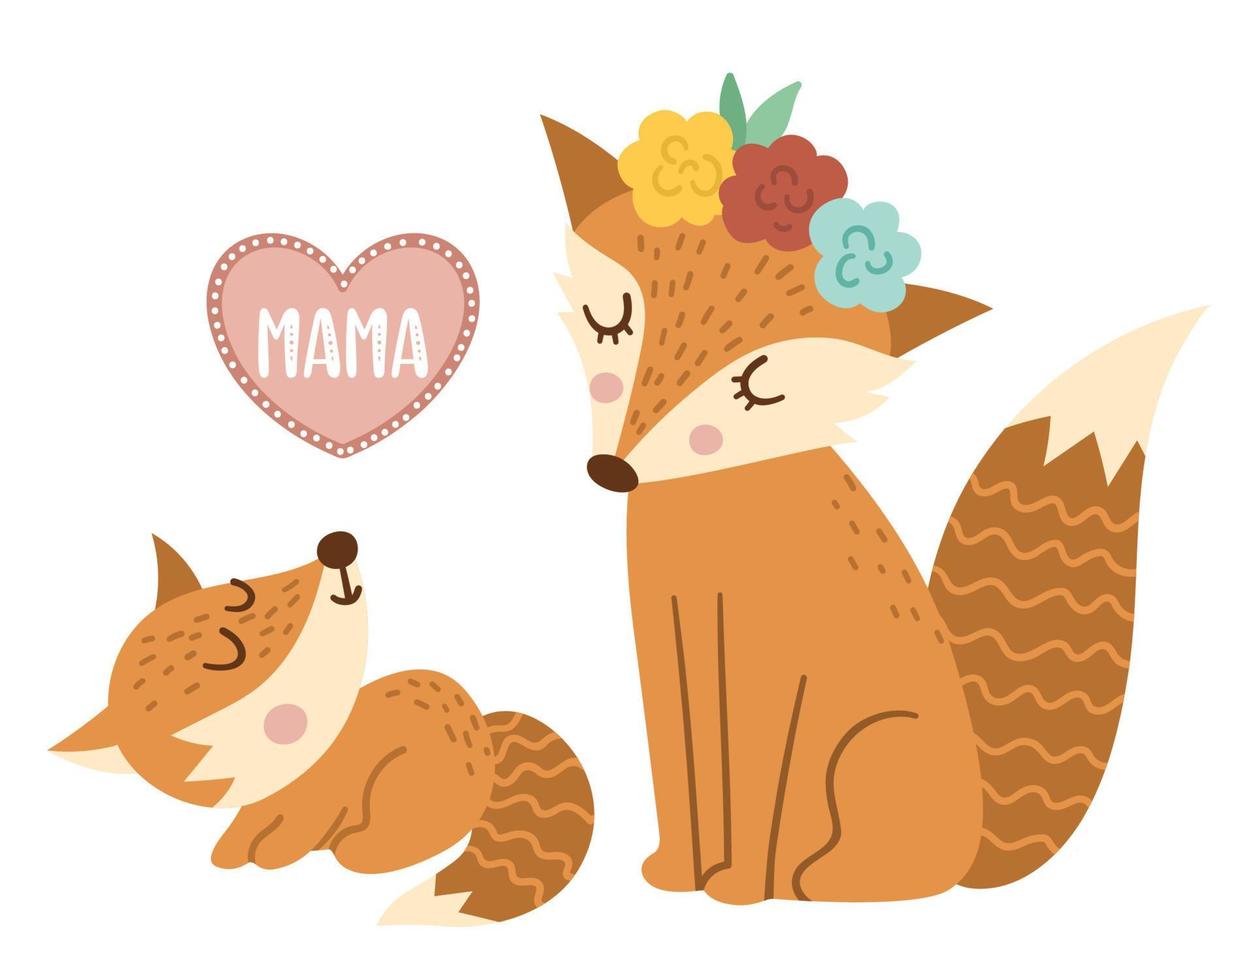 Vector hand drawn baby fox with parent isolated on white. Funny bohemian style woodland animal scene showing family love. Cute boho forest illustration for card, print, stationery design.